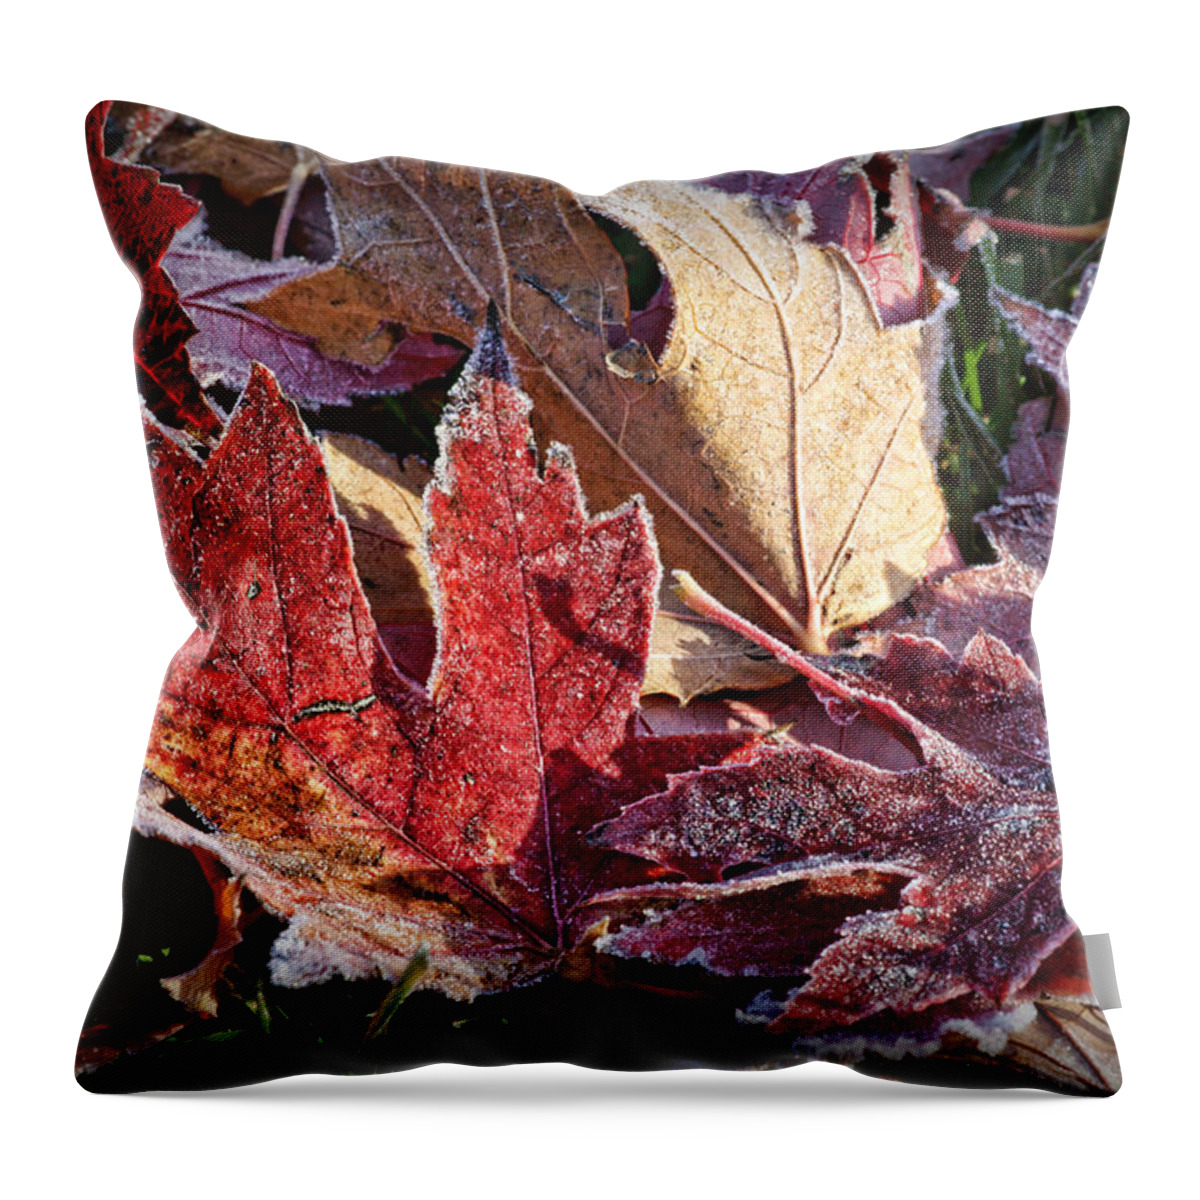 Leaves Throw Pillow featuring the photograph Frosted Leaves #2 by Nikolyn McDonald